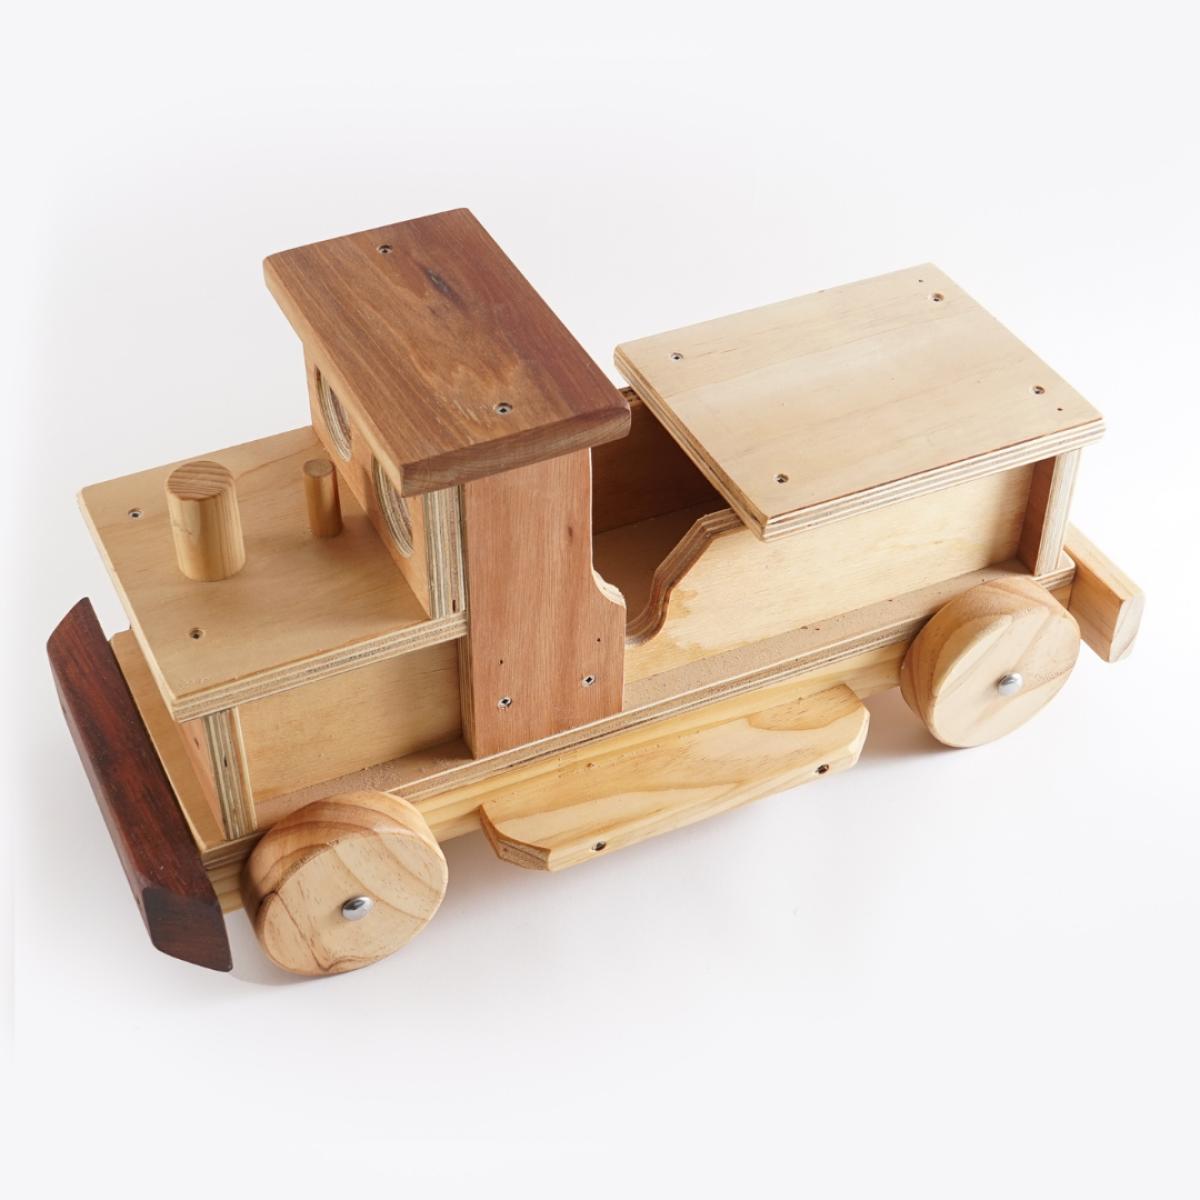 Engine 165 00 Pioneer Wooden Toys